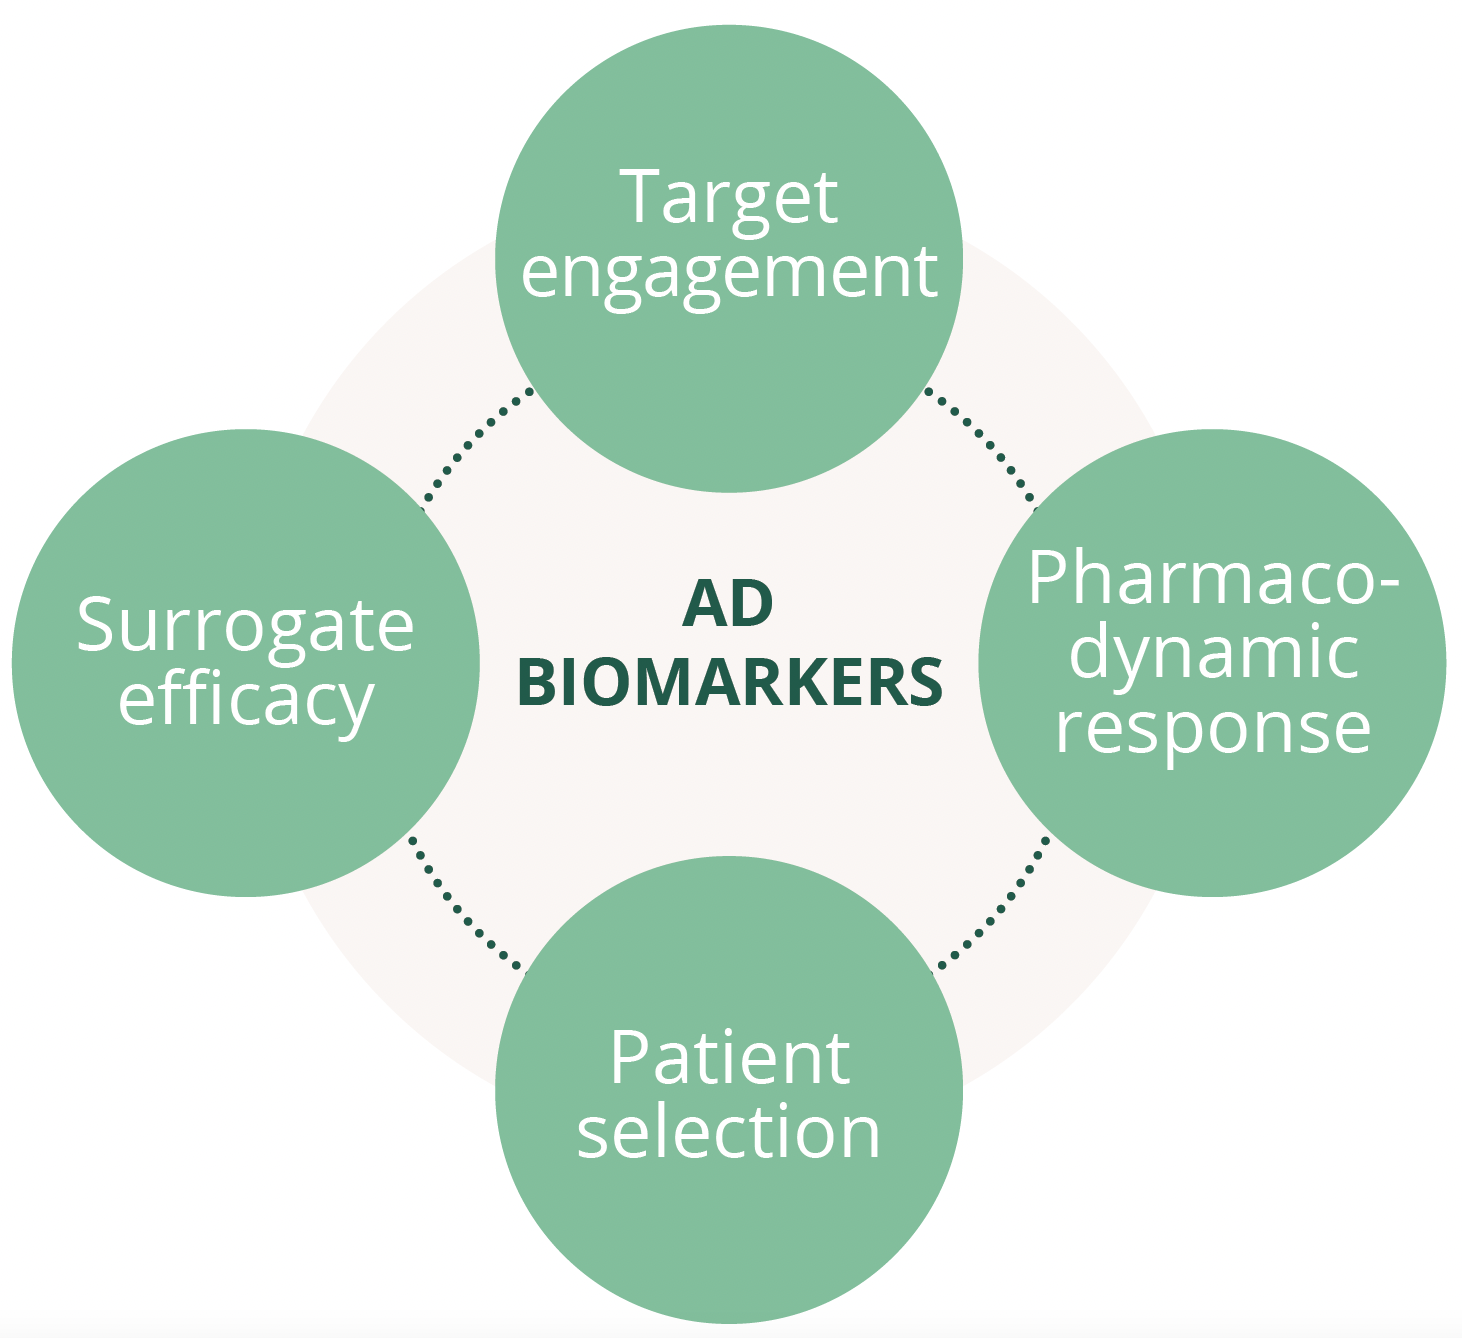 Applications of AD biomarkers in clinical trials include target engagement, measurement of pharmacodynamic response, patient selection and as surrogate efficacy markers